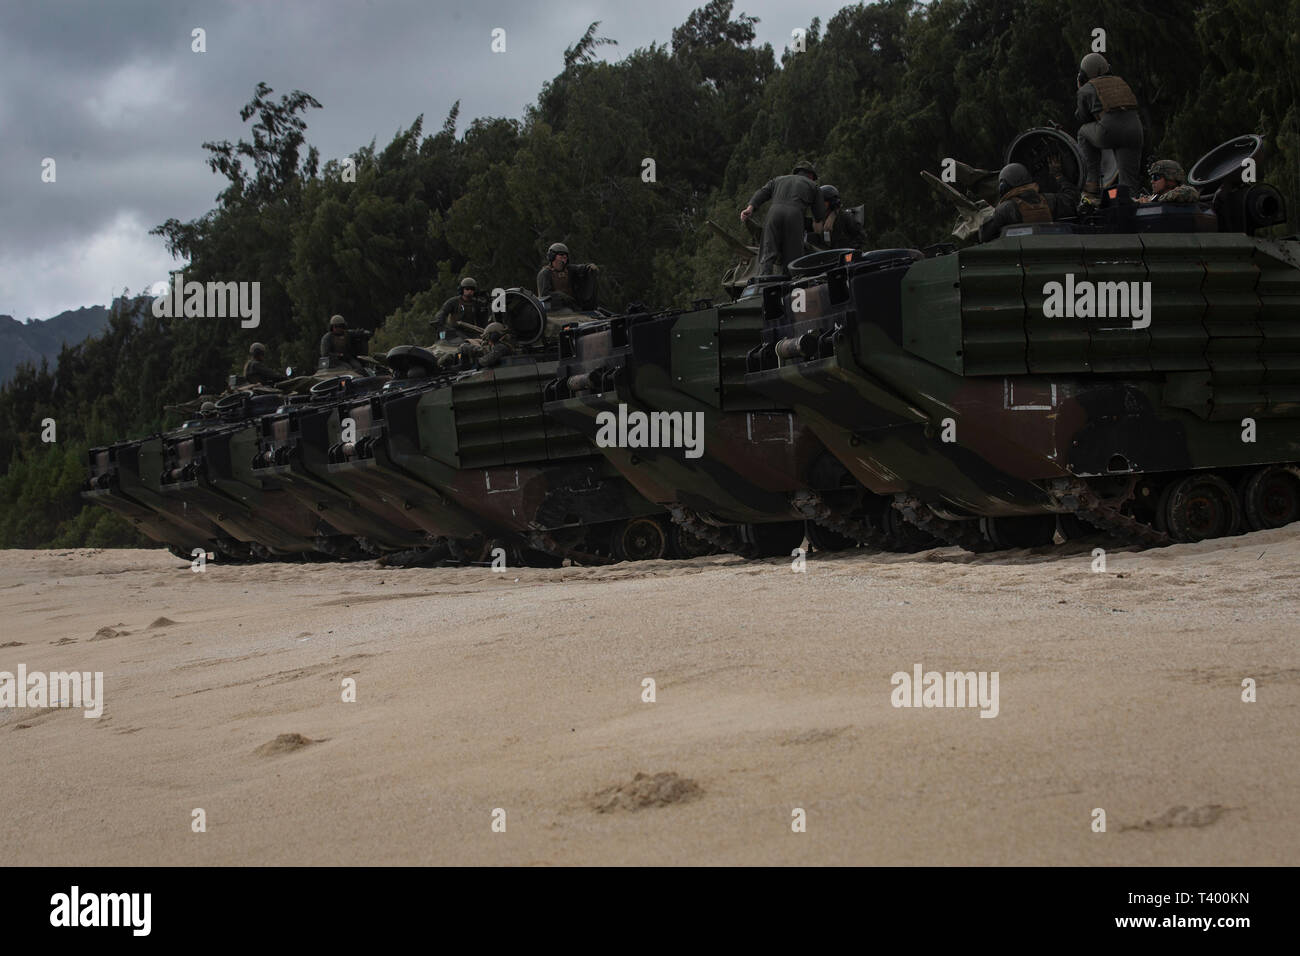 U.S. Marines with Combat Assault Company, 3d Marine Regiment, prepare amphibious assault vehicles prior to conducting a beach assault exercise at Marine Corps Training Area Bellows, Marine Corps Base Hawaii, Apr. 9, 2019. The unit conducted a simulated beach assault to improve their lethality and cooperation, as a mechanized unit and force in readiness. (U.S. Marine Corps photo by Sgt. Alex Kouns) Stock Photo